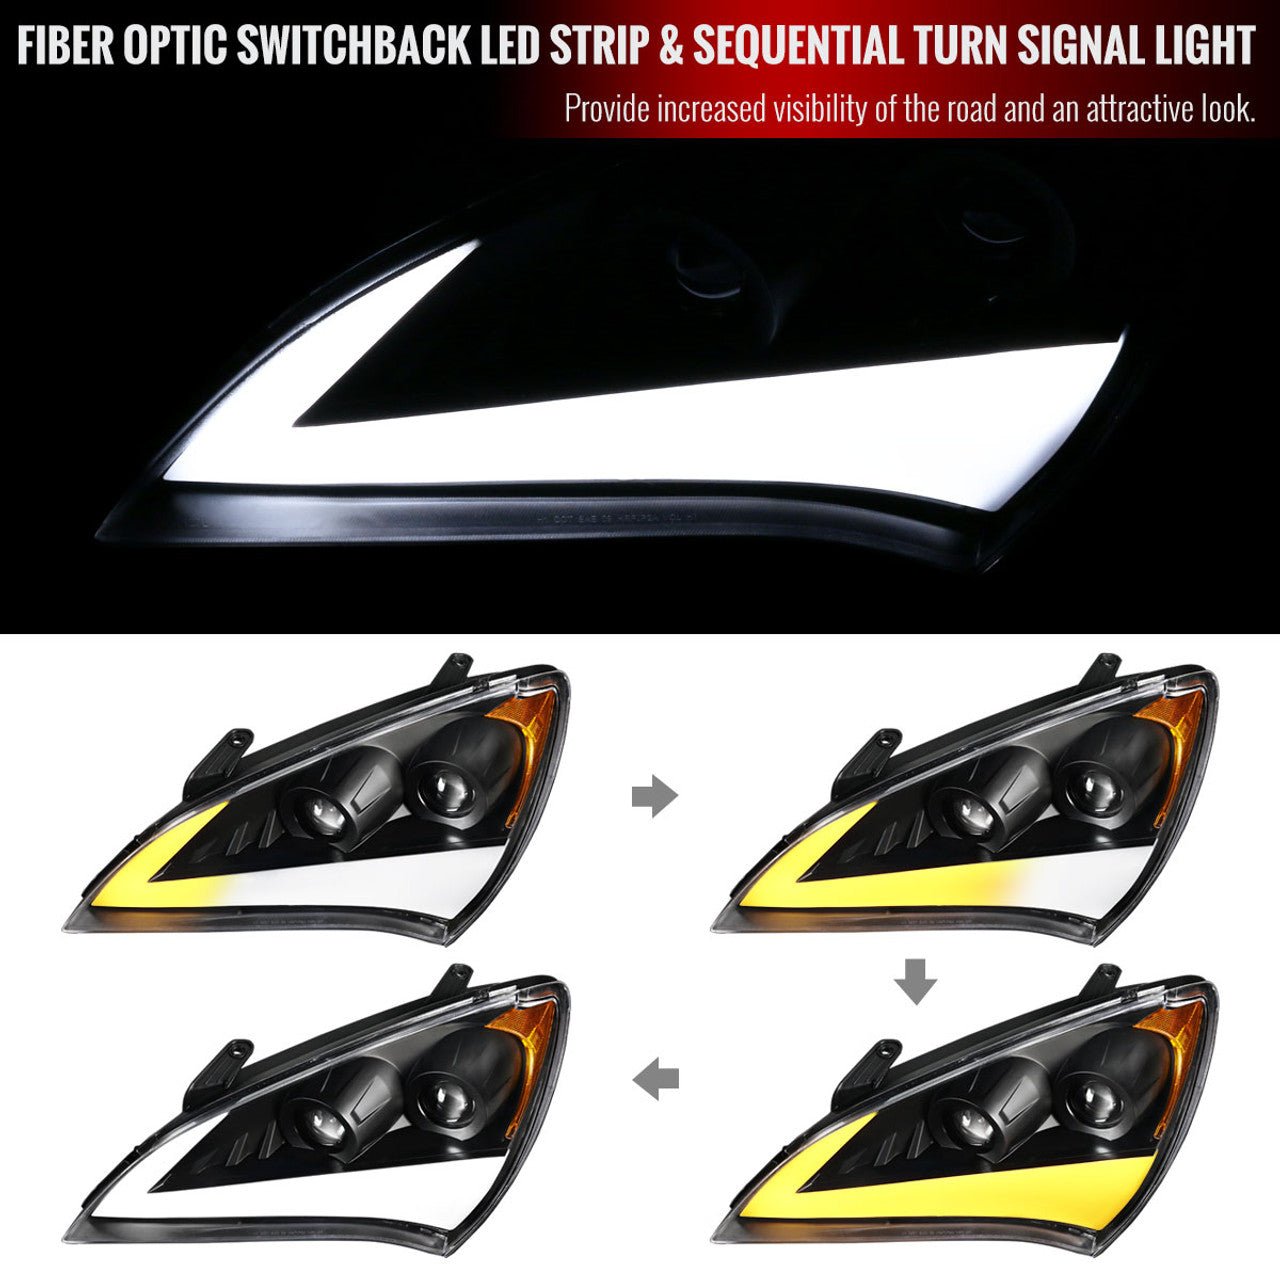 Spec-D Tuning 2010-2012 HYUNDAI GENESIS COUPE SEQUENTIAL LED BAR PROJECTOR HEADLIGHTS - Partsaccessoriesusa